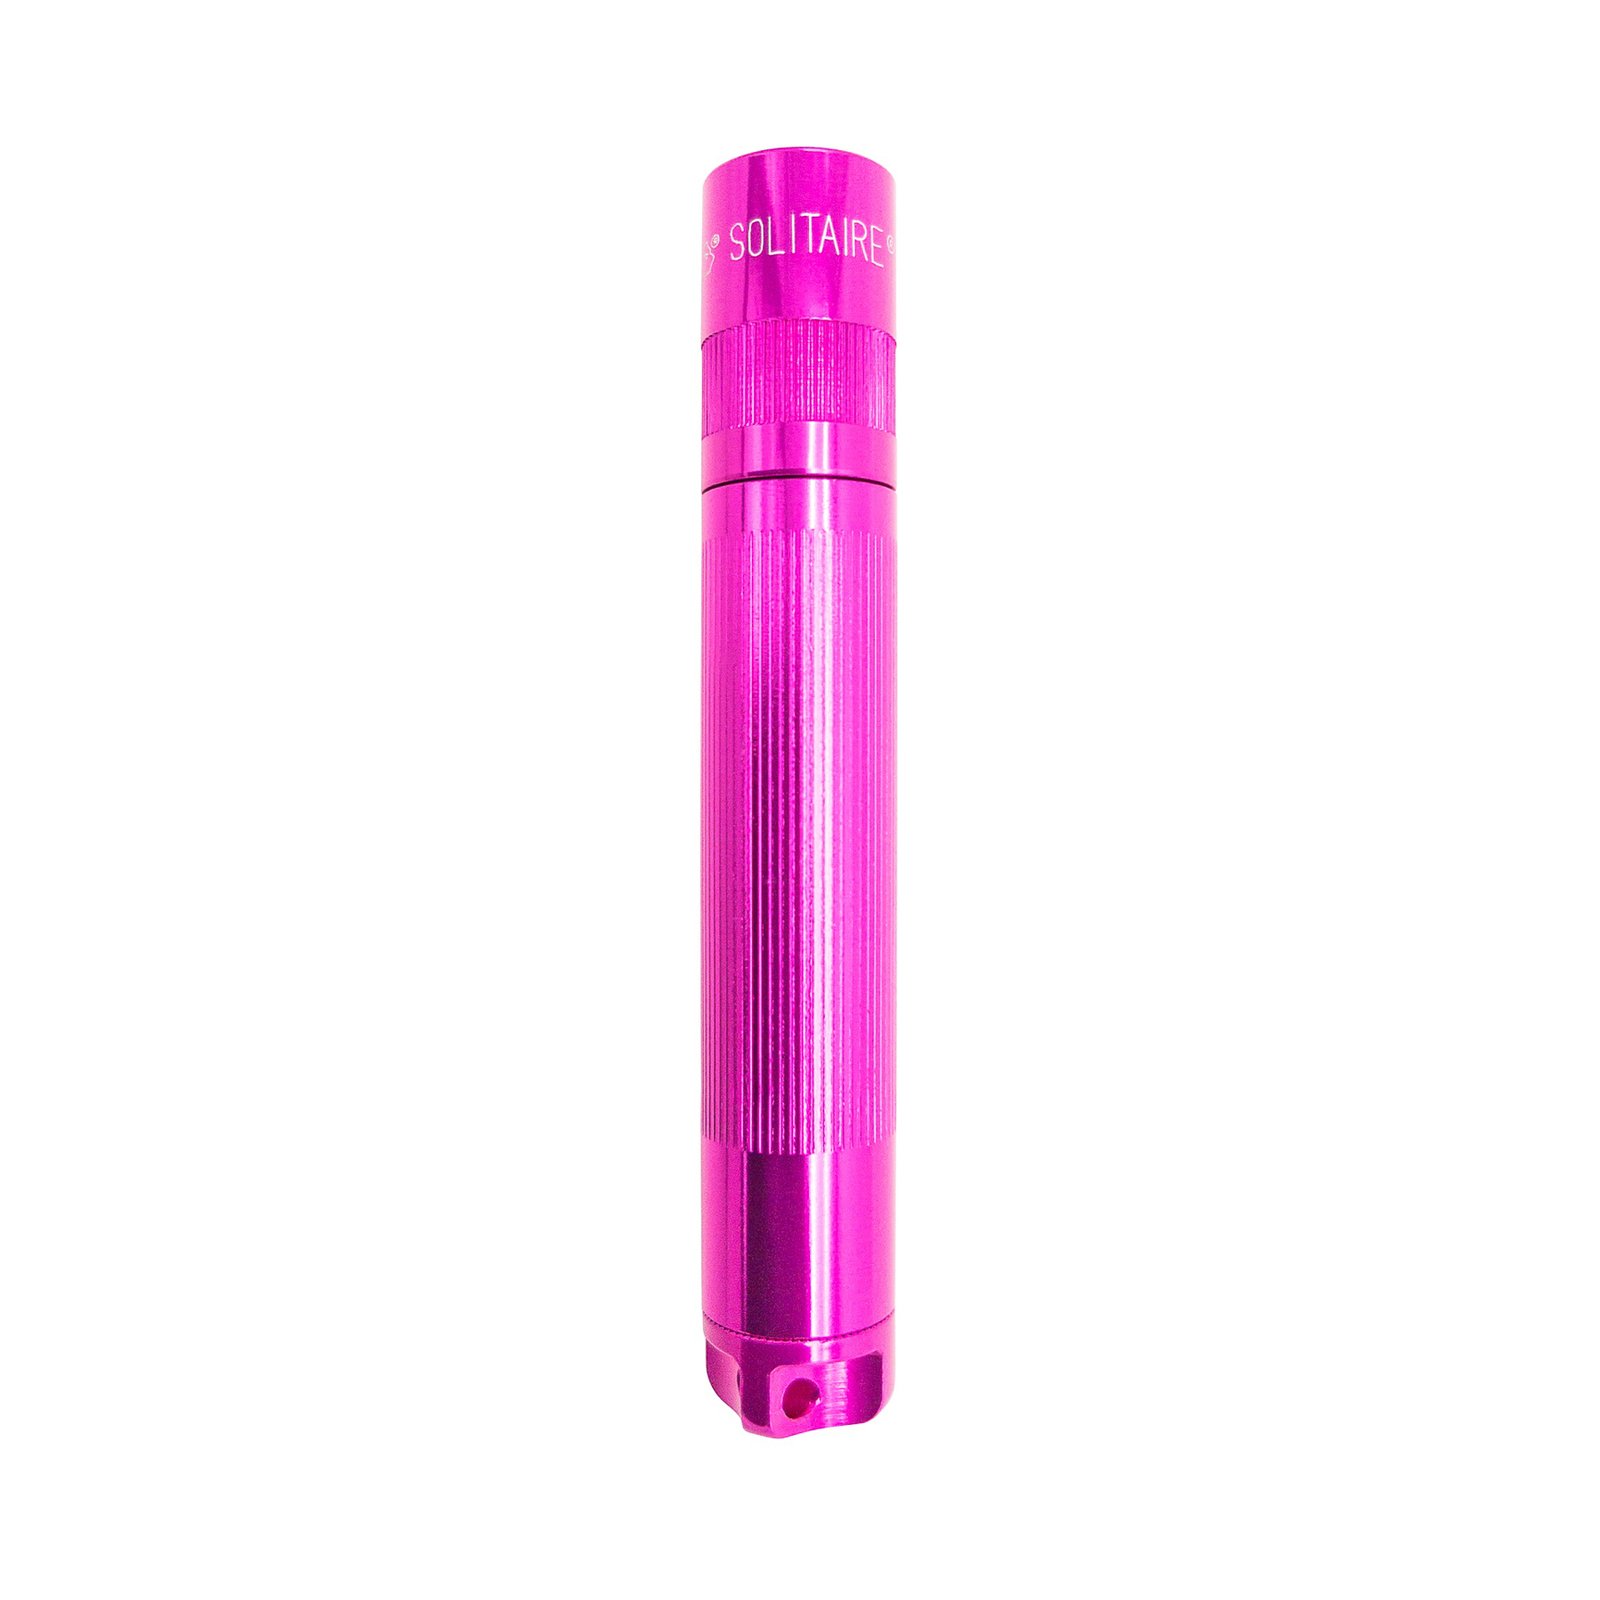 Maglite Xenon torch Solitaire 1-Cell AAA, Box, pink